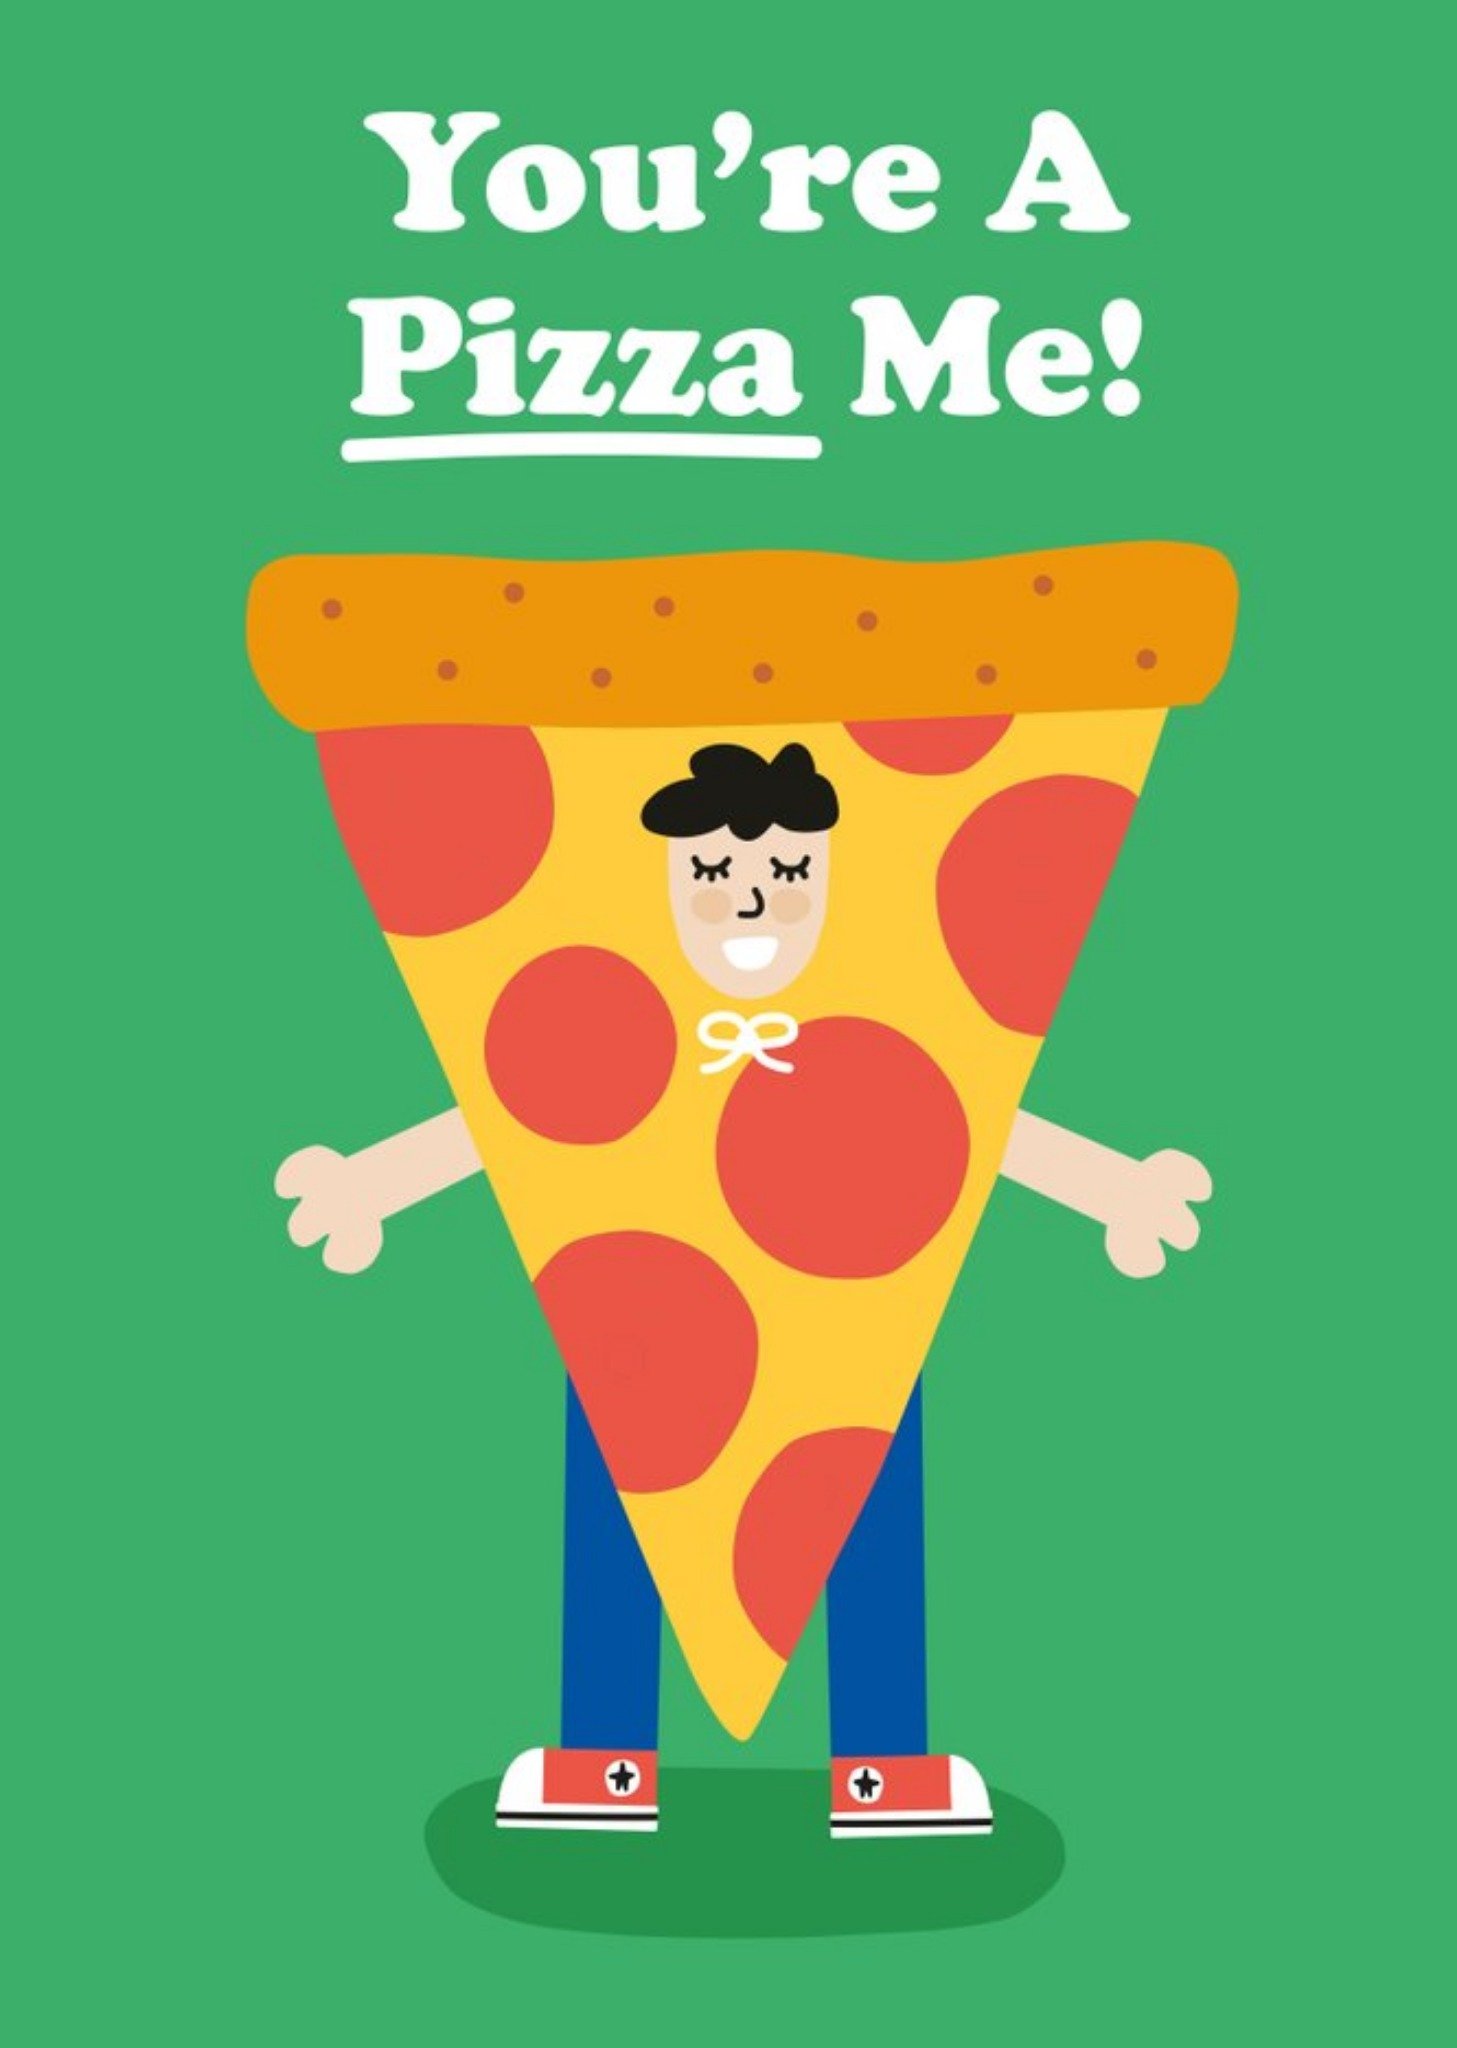 Moonpig Illustration Of A Person Wearing A Pizza Costume You're A Pizza Me Funny Pun Card Ecard